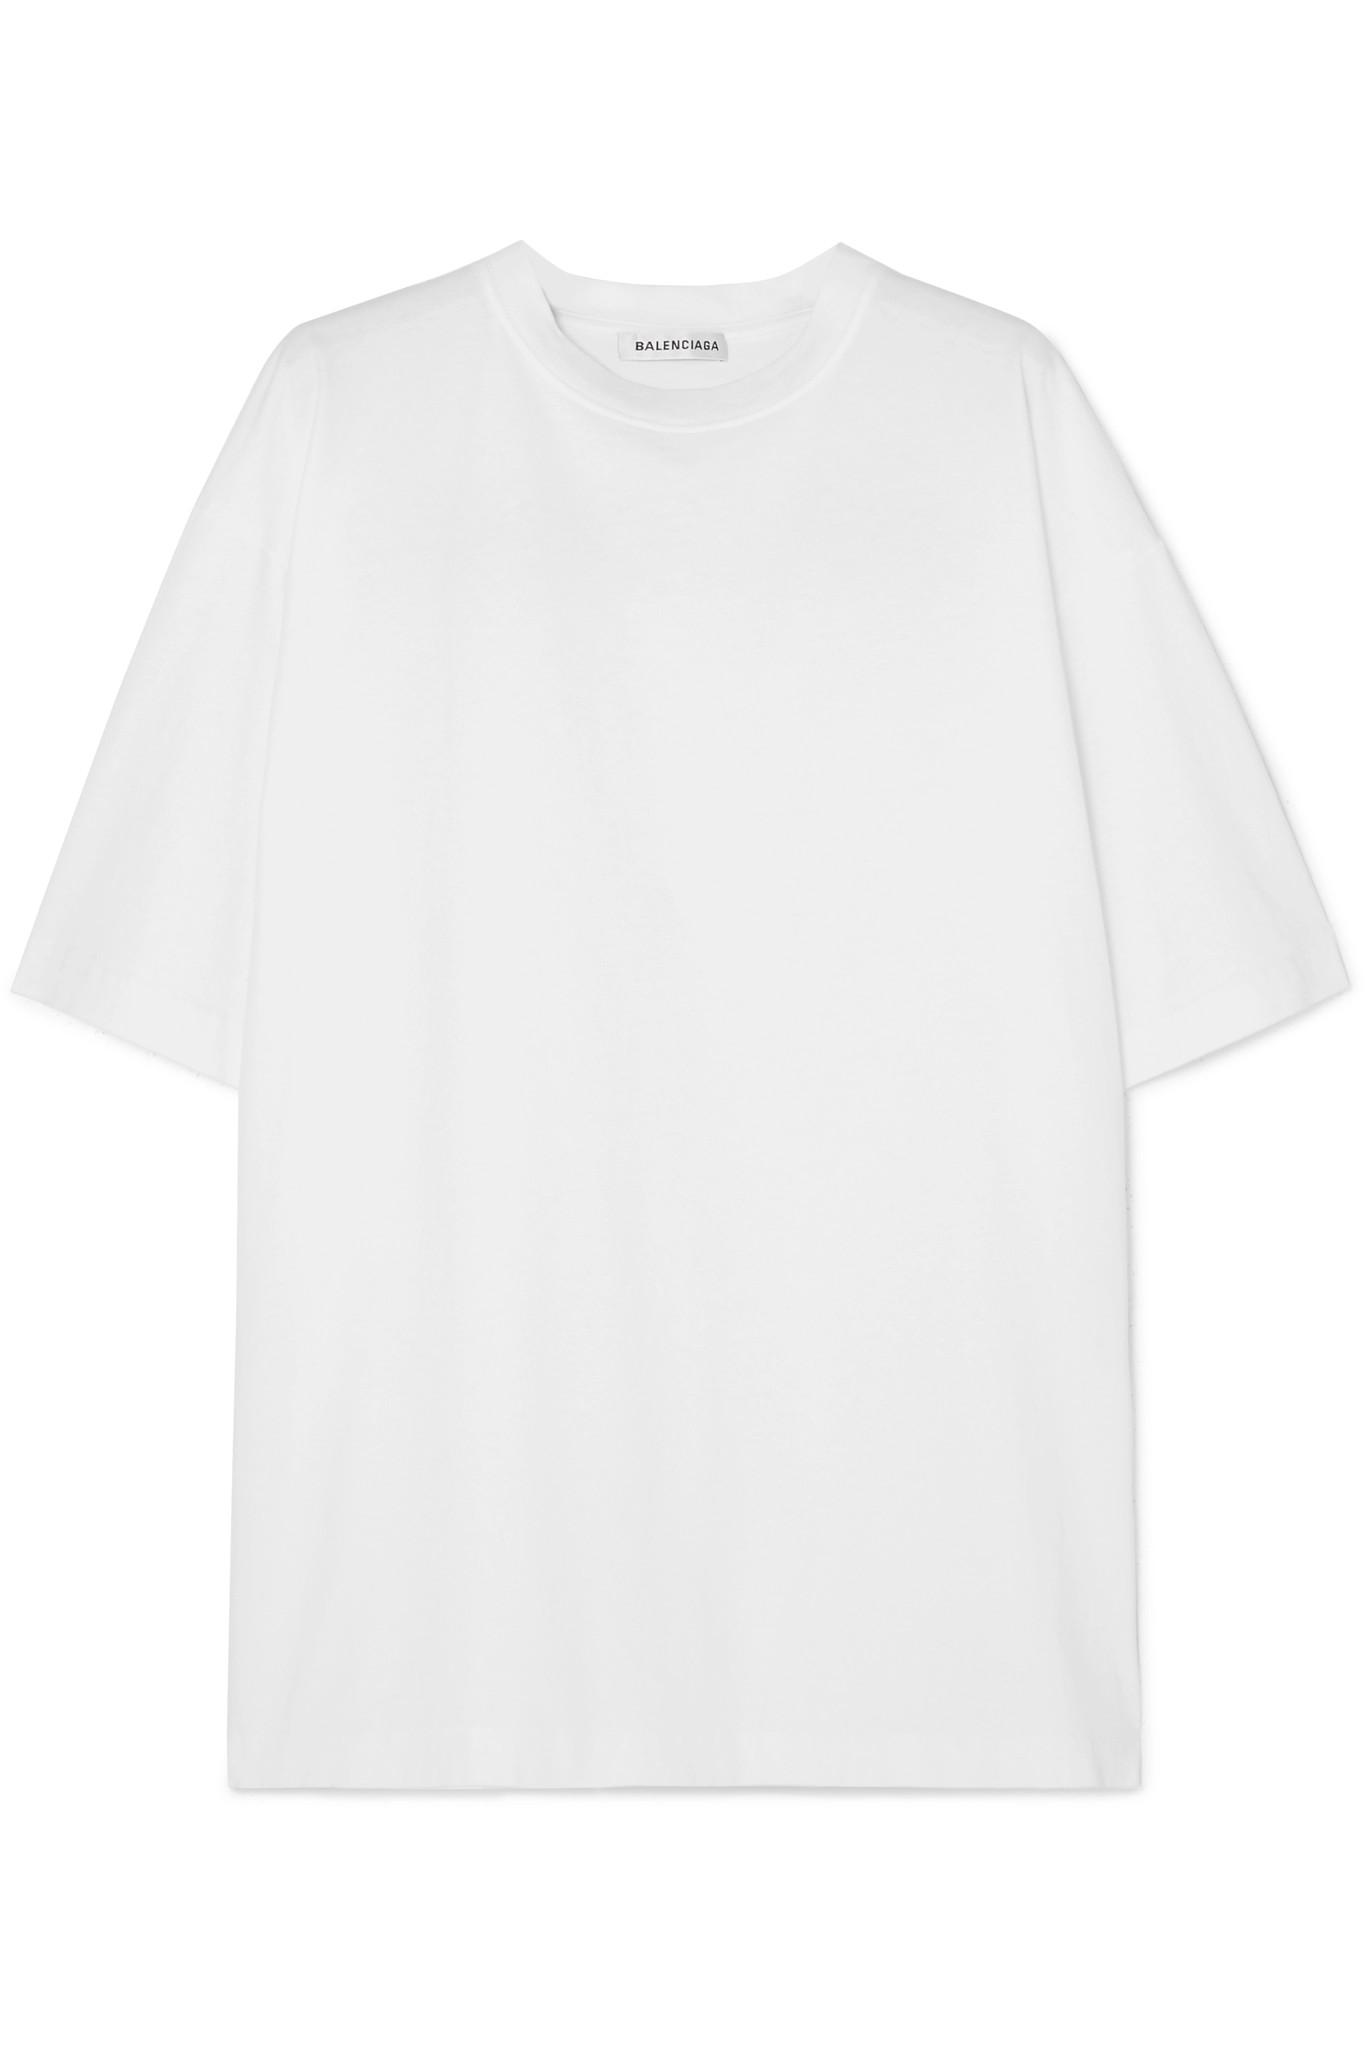 Lyst - Balenciaga Oversized Embroidered Cotton-jersey T-shirt in White